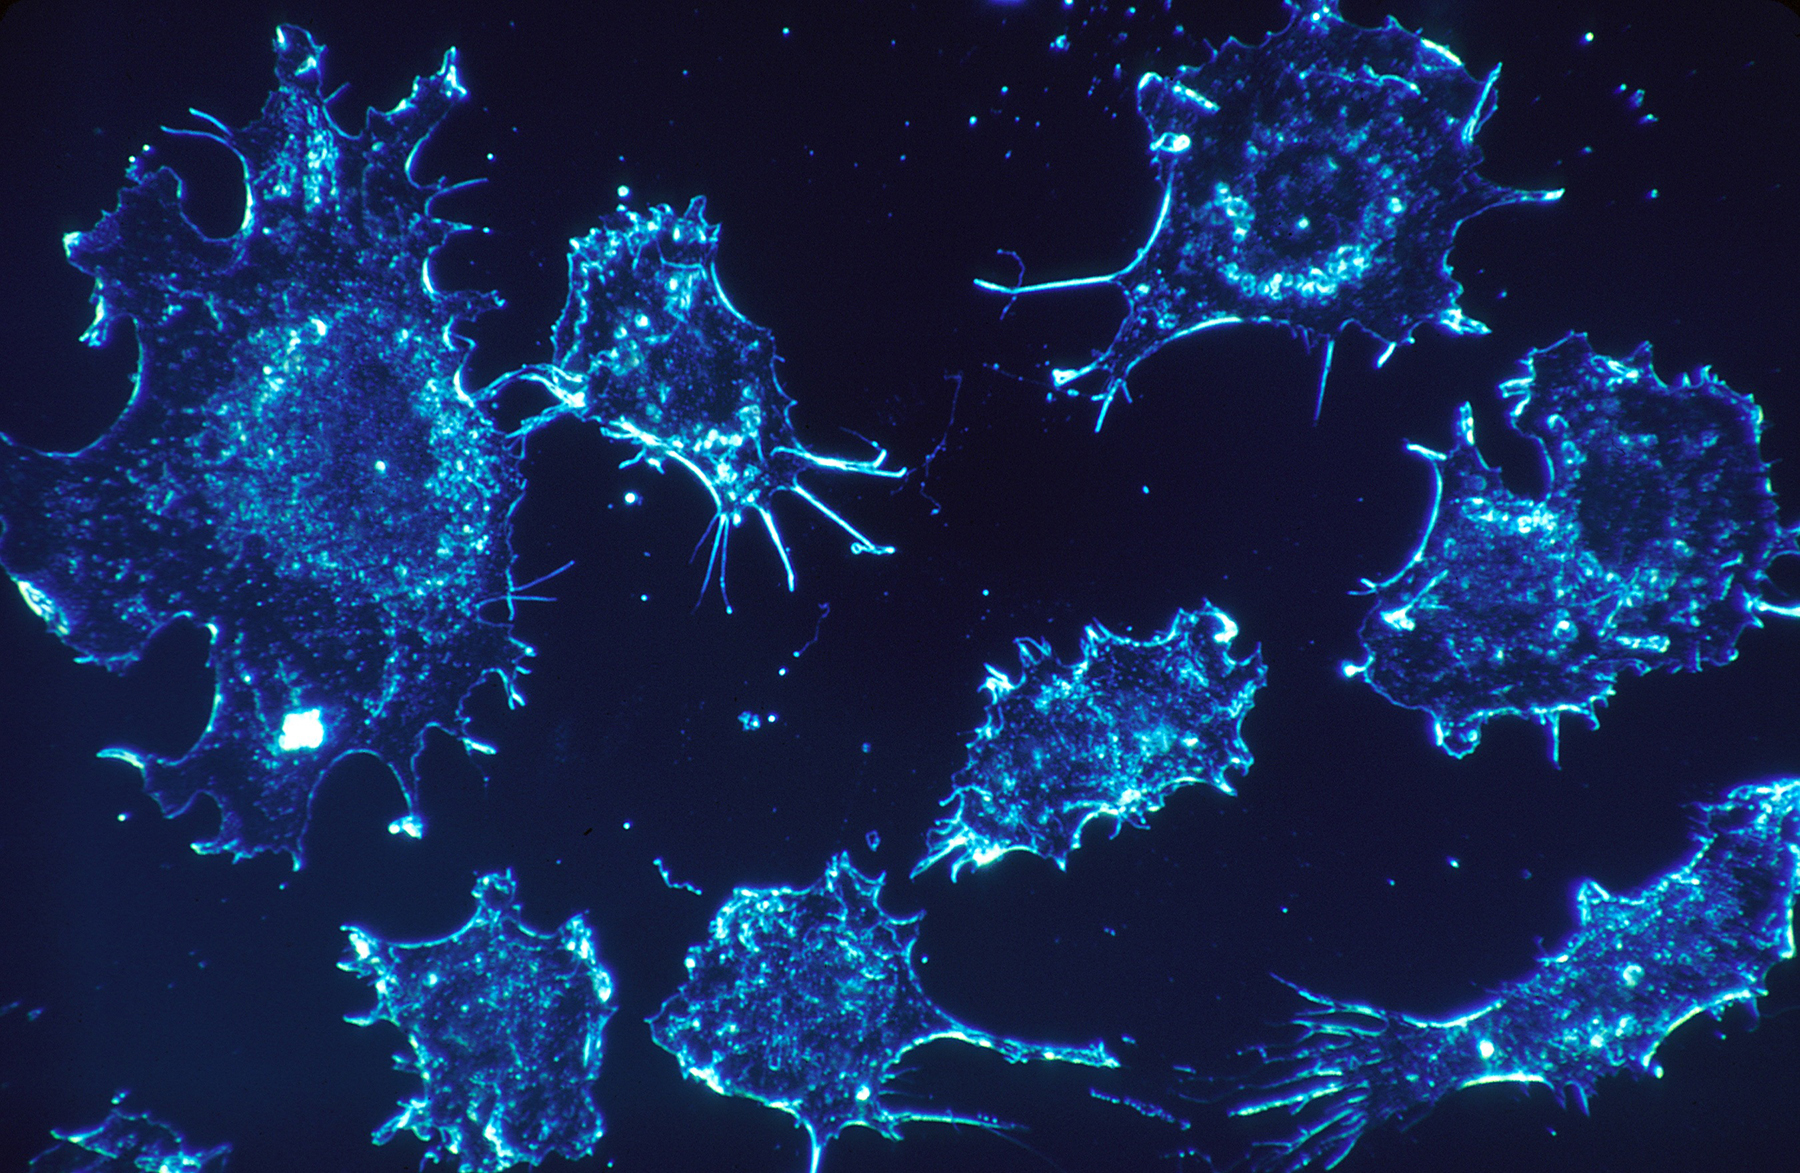 An extreme close-up view of cancer cells, tinted blue.